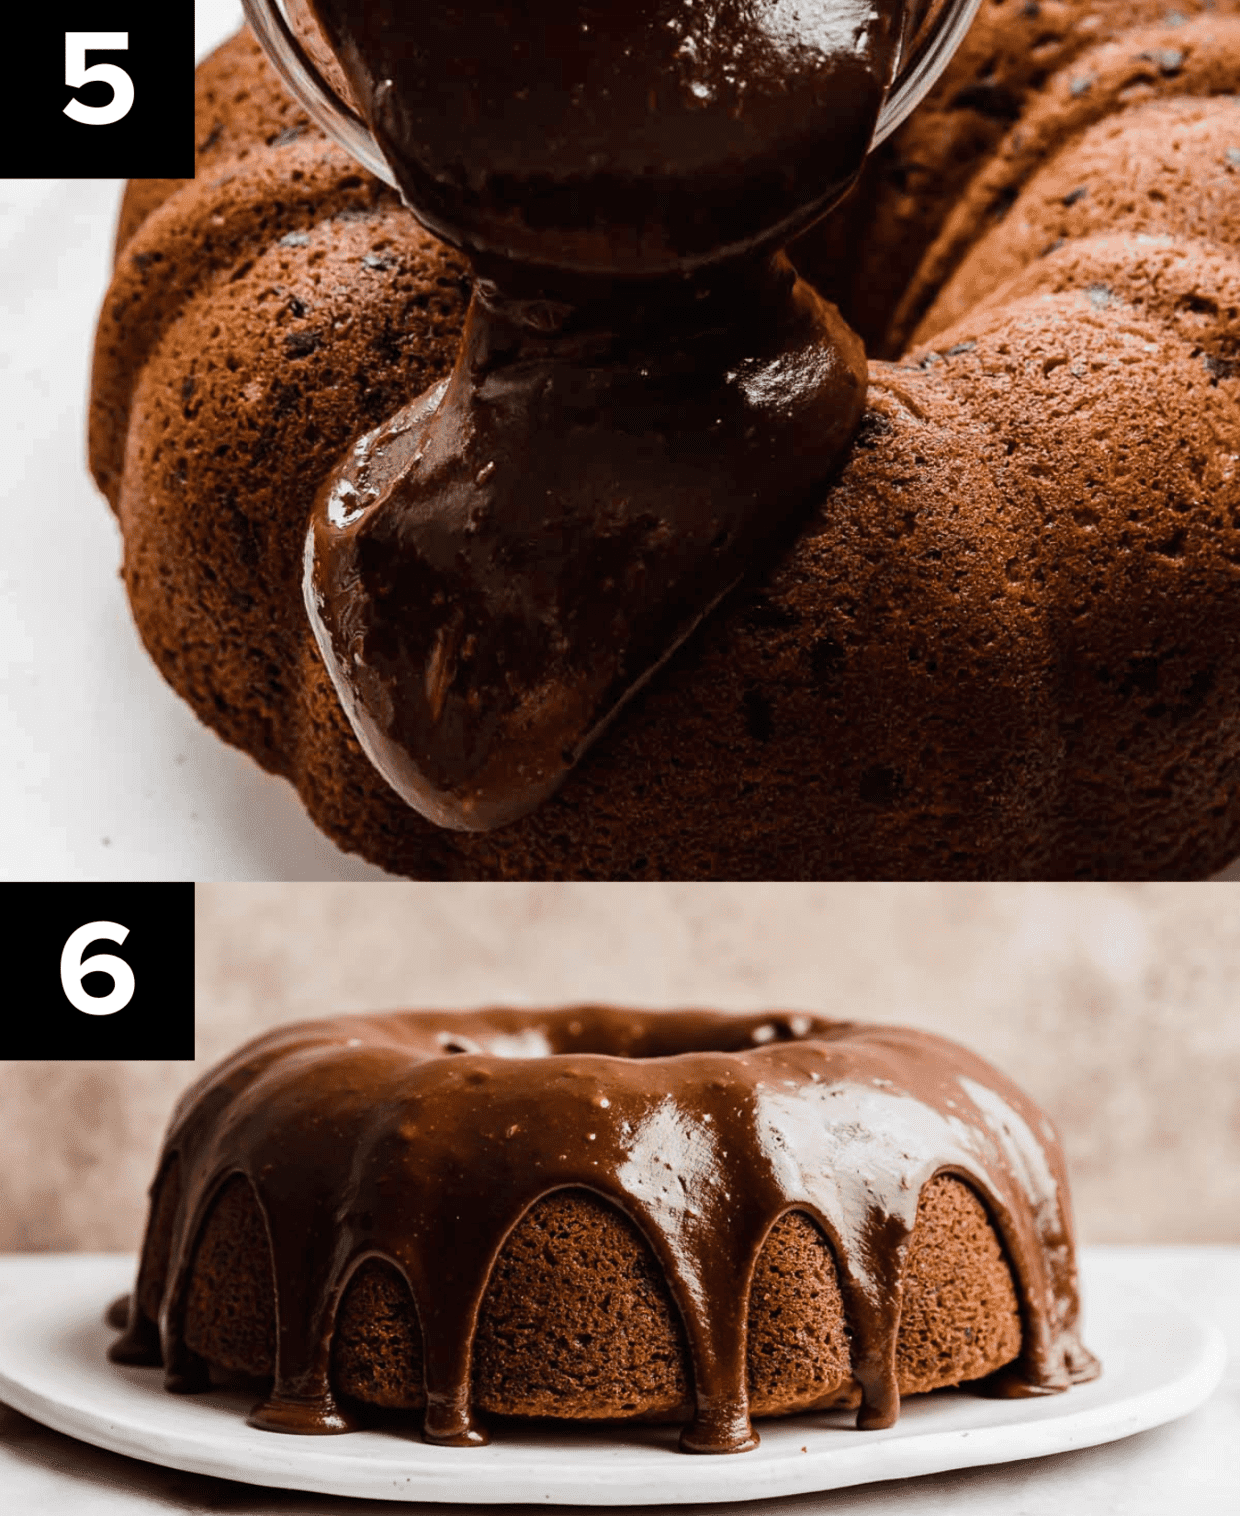 Two images, top image has chocolate ganache pouring overtop a Chocolate Chip Bundt Cake, bottom image is a fully chocolate glazed Chocolate Chip Bundt Cake against a light brown background.